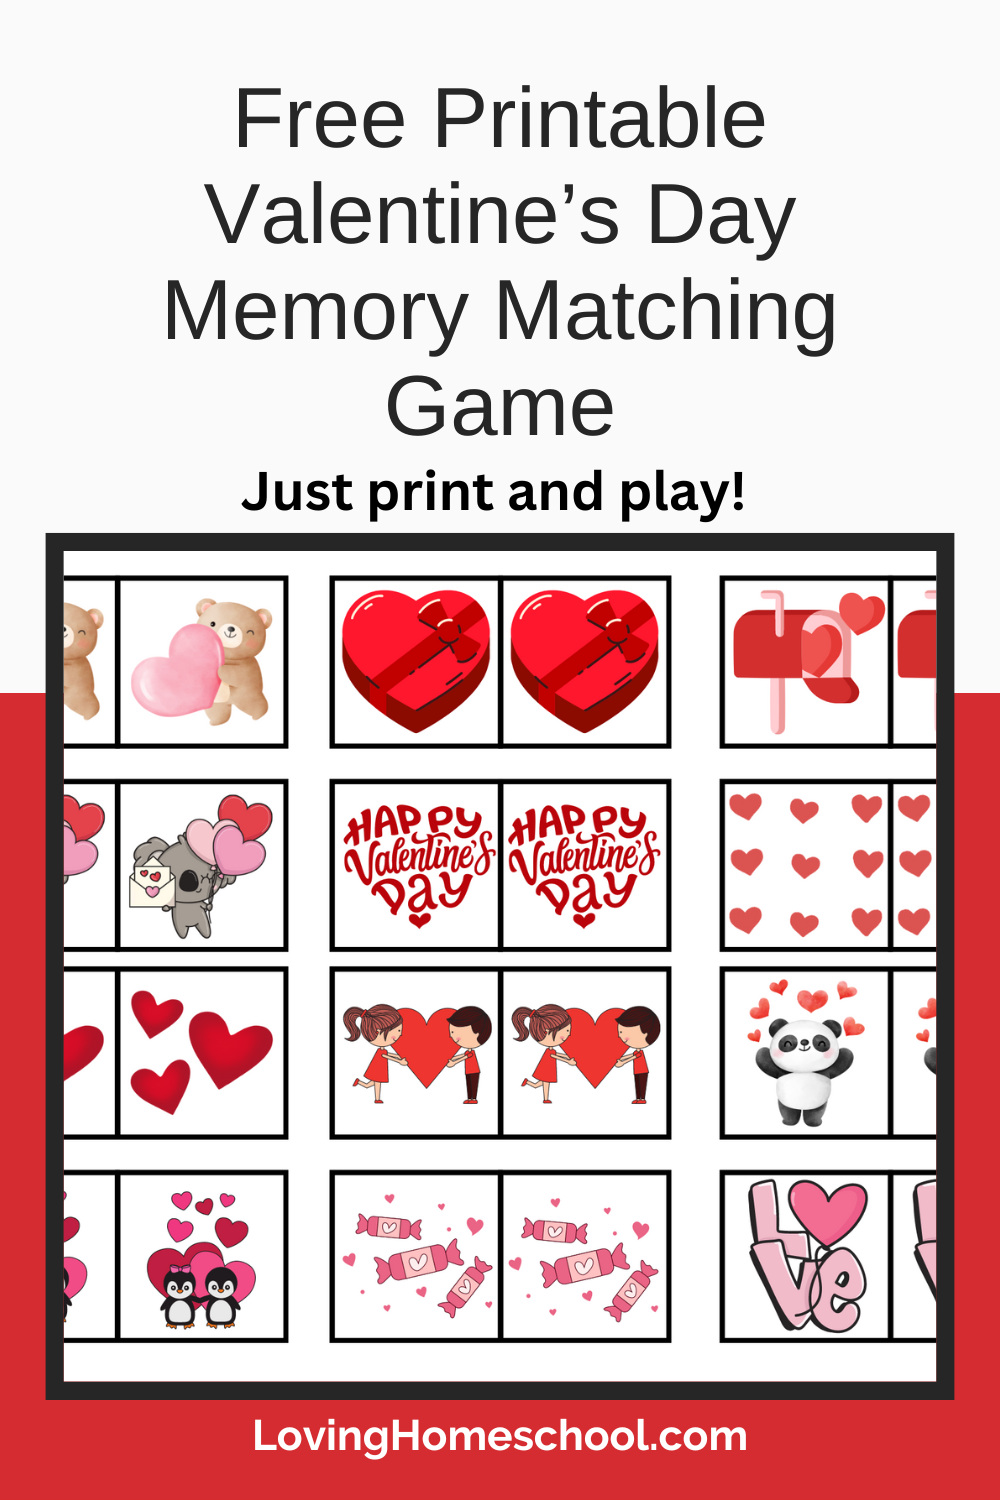 Free Printable Valentine’s Day Memory Matching Game